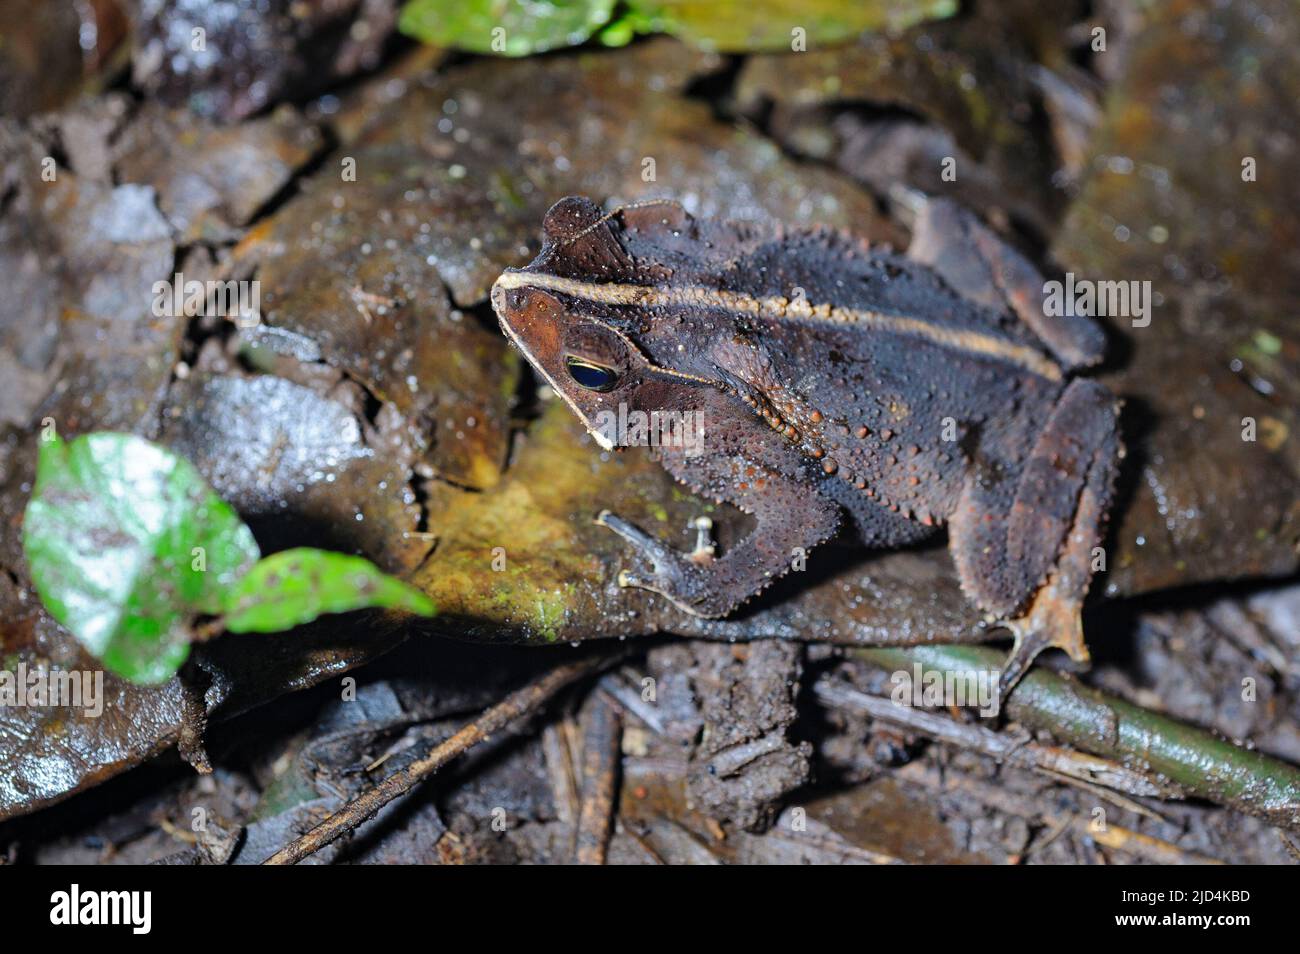 Toad from the rainforest floor at LaSelva, Ecuador, probably belonging to the genus Rhinella. Stock Photo